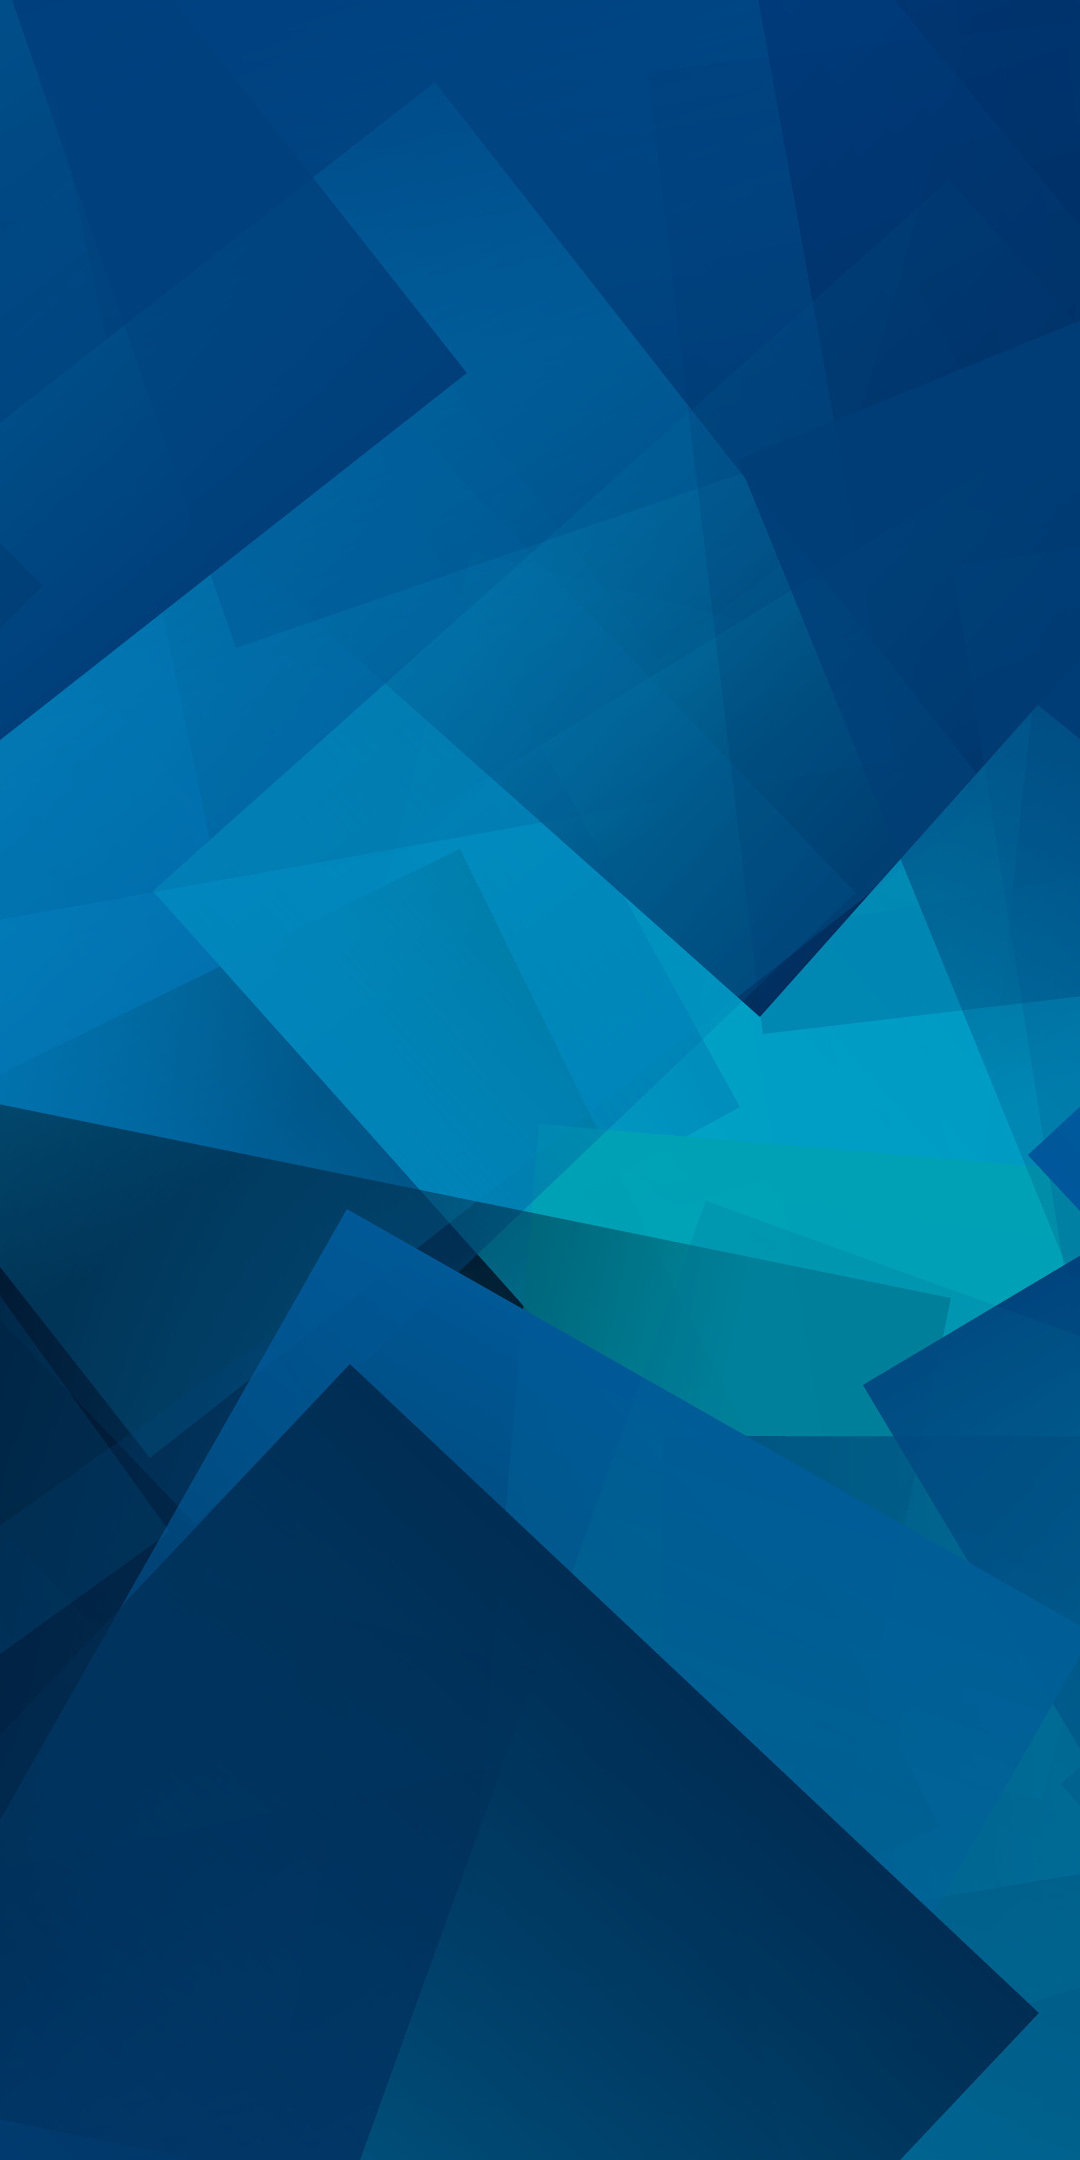 Download wallpaper 1080x2160 cubes, pattern, sea blue, abstract, honor ...